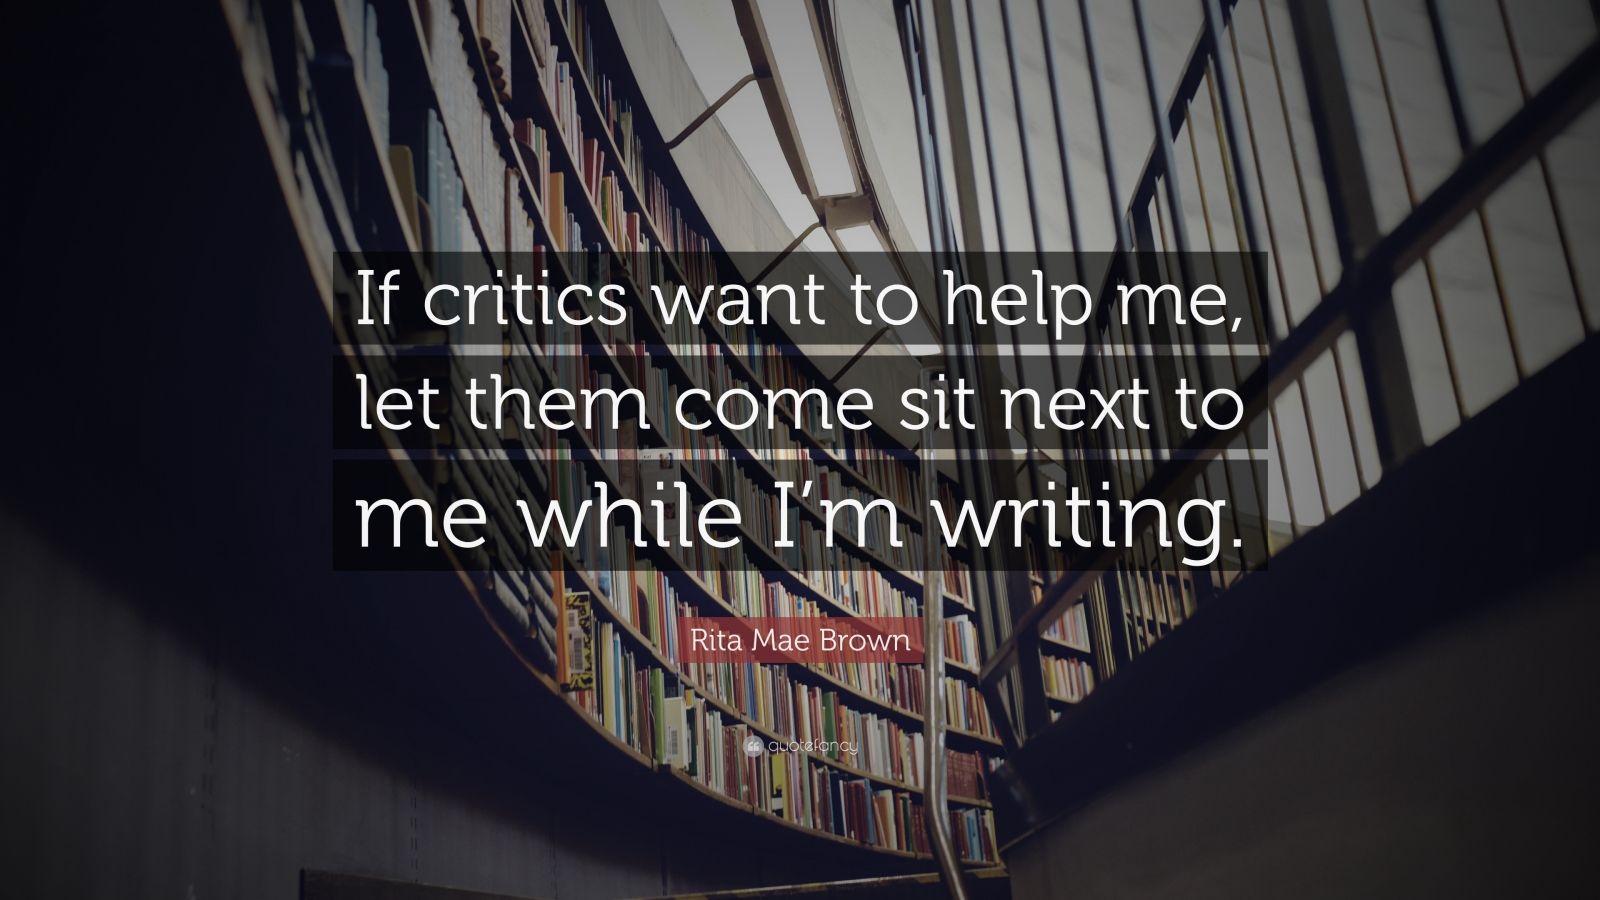 Rita Mae Brown Quote: "If critics want to help me, let them come sit next to me while I'm ...